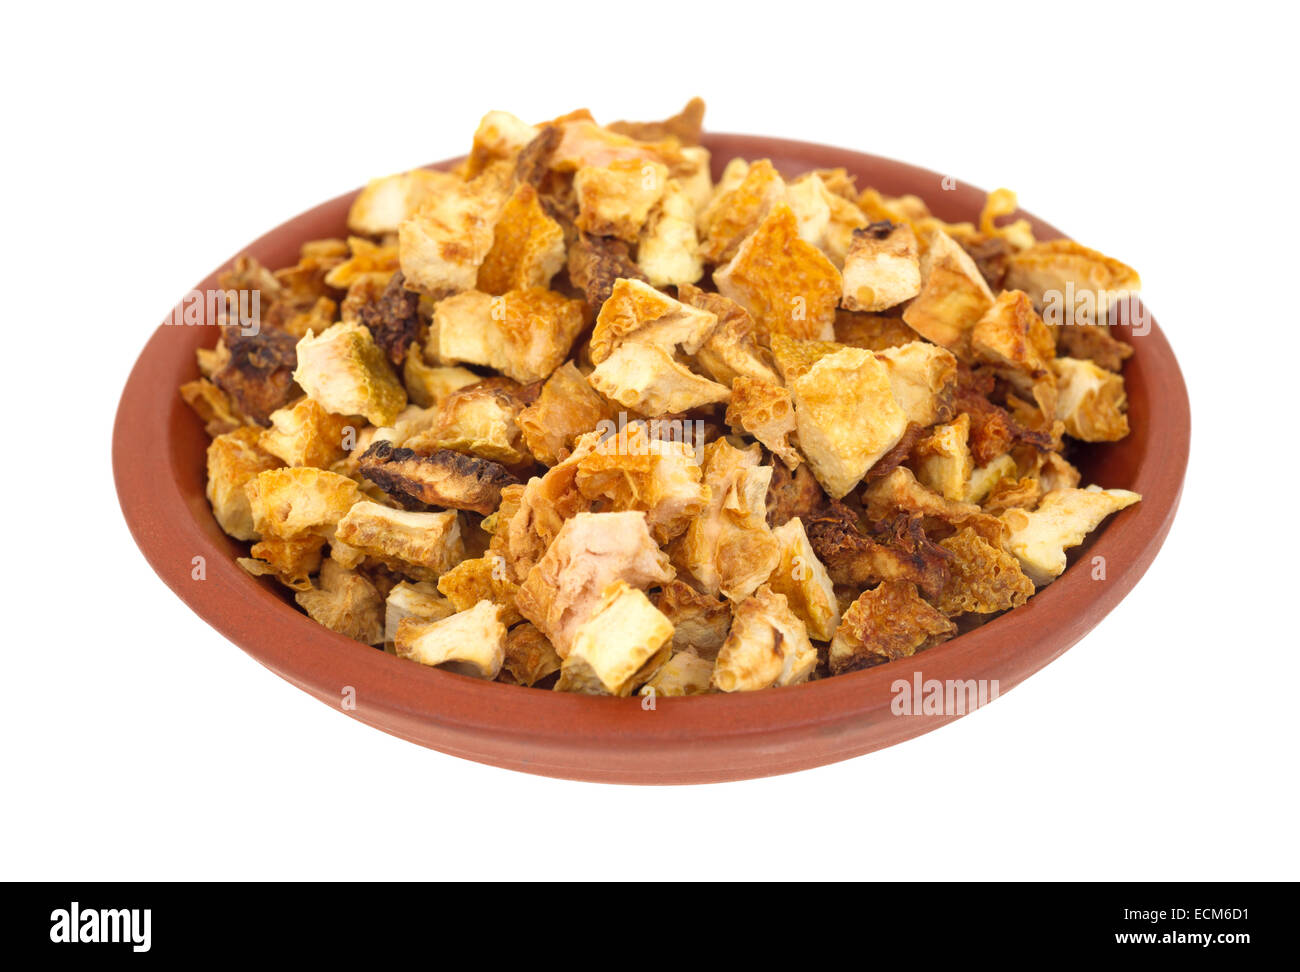 A small bowl filled with chopped orange peel rind on a white background. Stock Photo